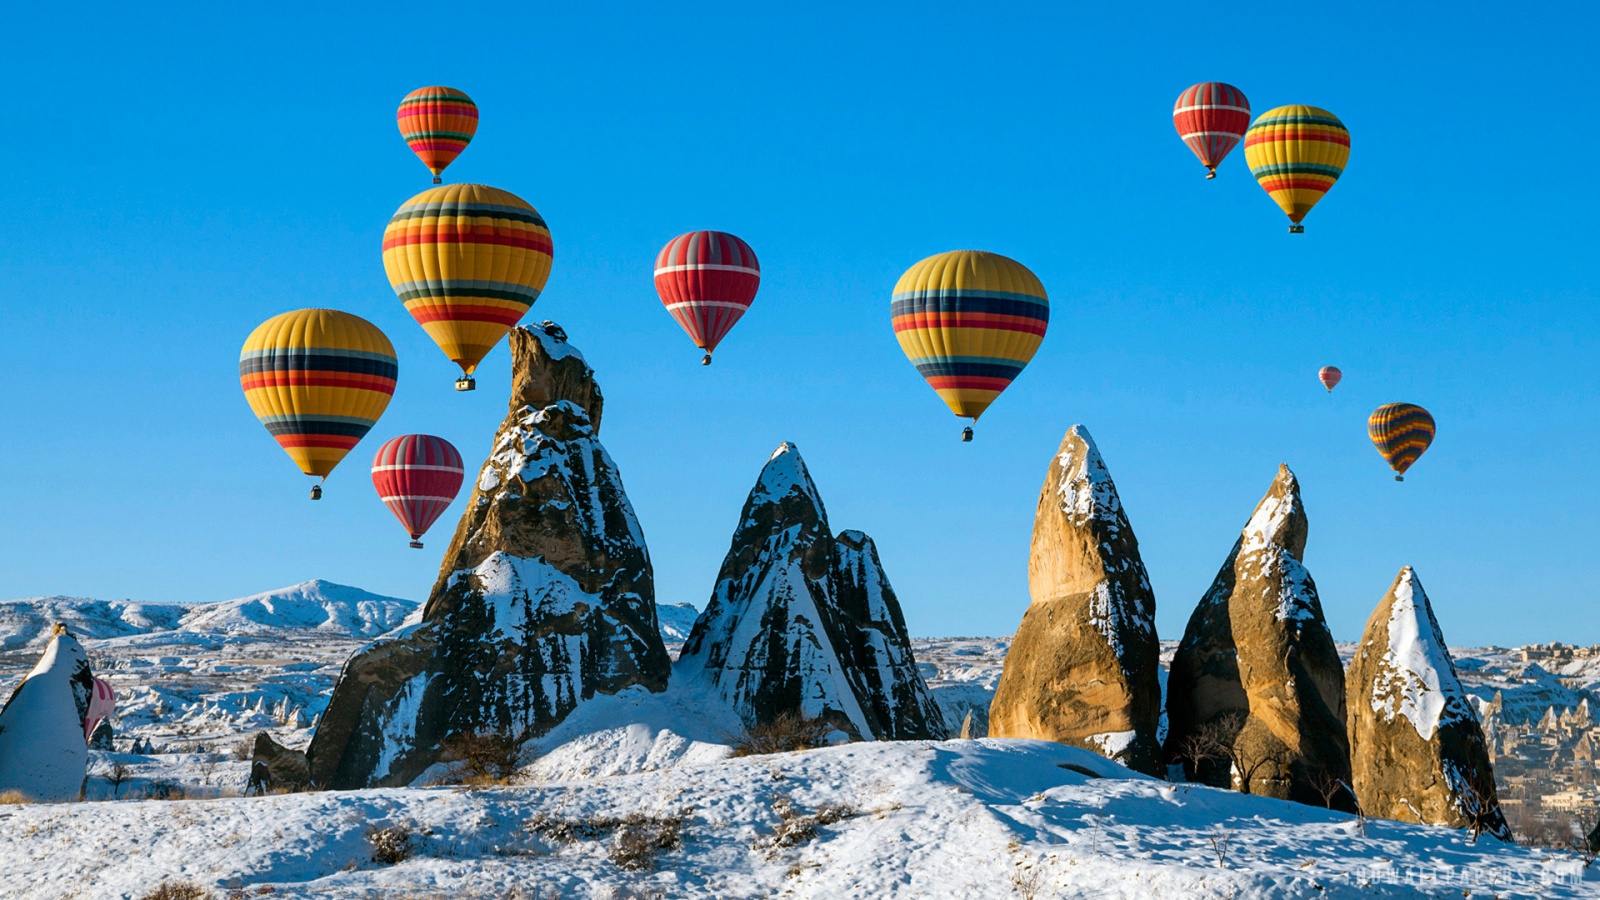 Free download Balloons over Snowy Cappadocia Turkey HD Wallpaper iHD  Wallpapers [1600x900] for your Desktop, Mobile & Tablet | Explore 35+  Thanksgiving Wallpaper HD 1600x900 | Thanksgiving Hd Wallpaper, 1600x900 Hd  Wallpaper,